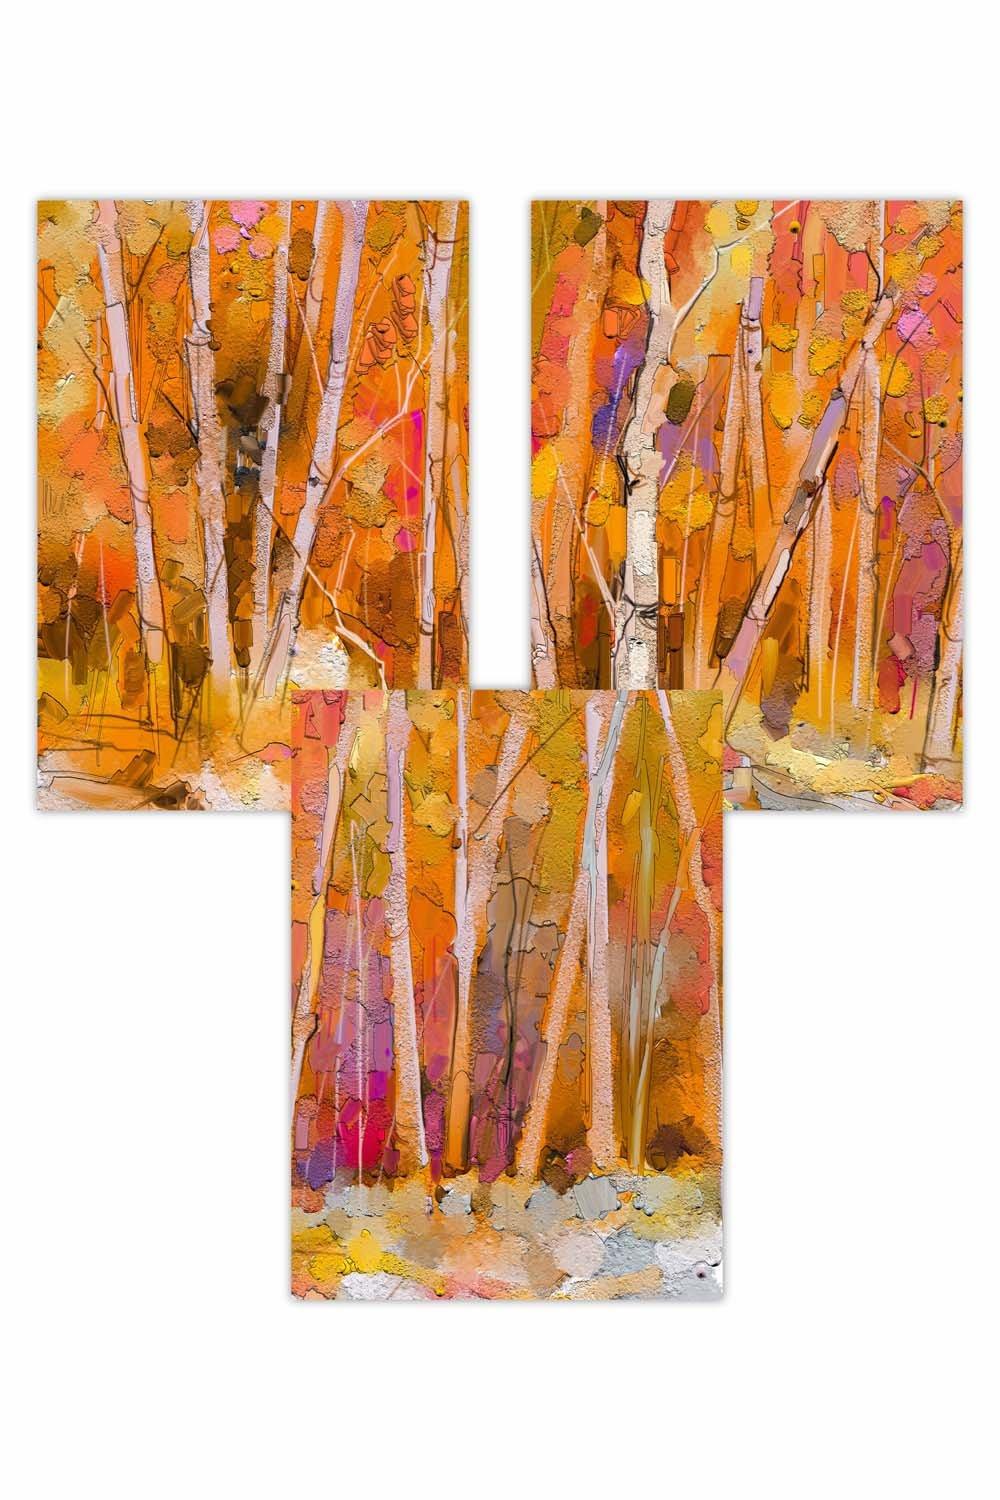 Set of 3 Abstract Autumn Trees in Orange Art Posters